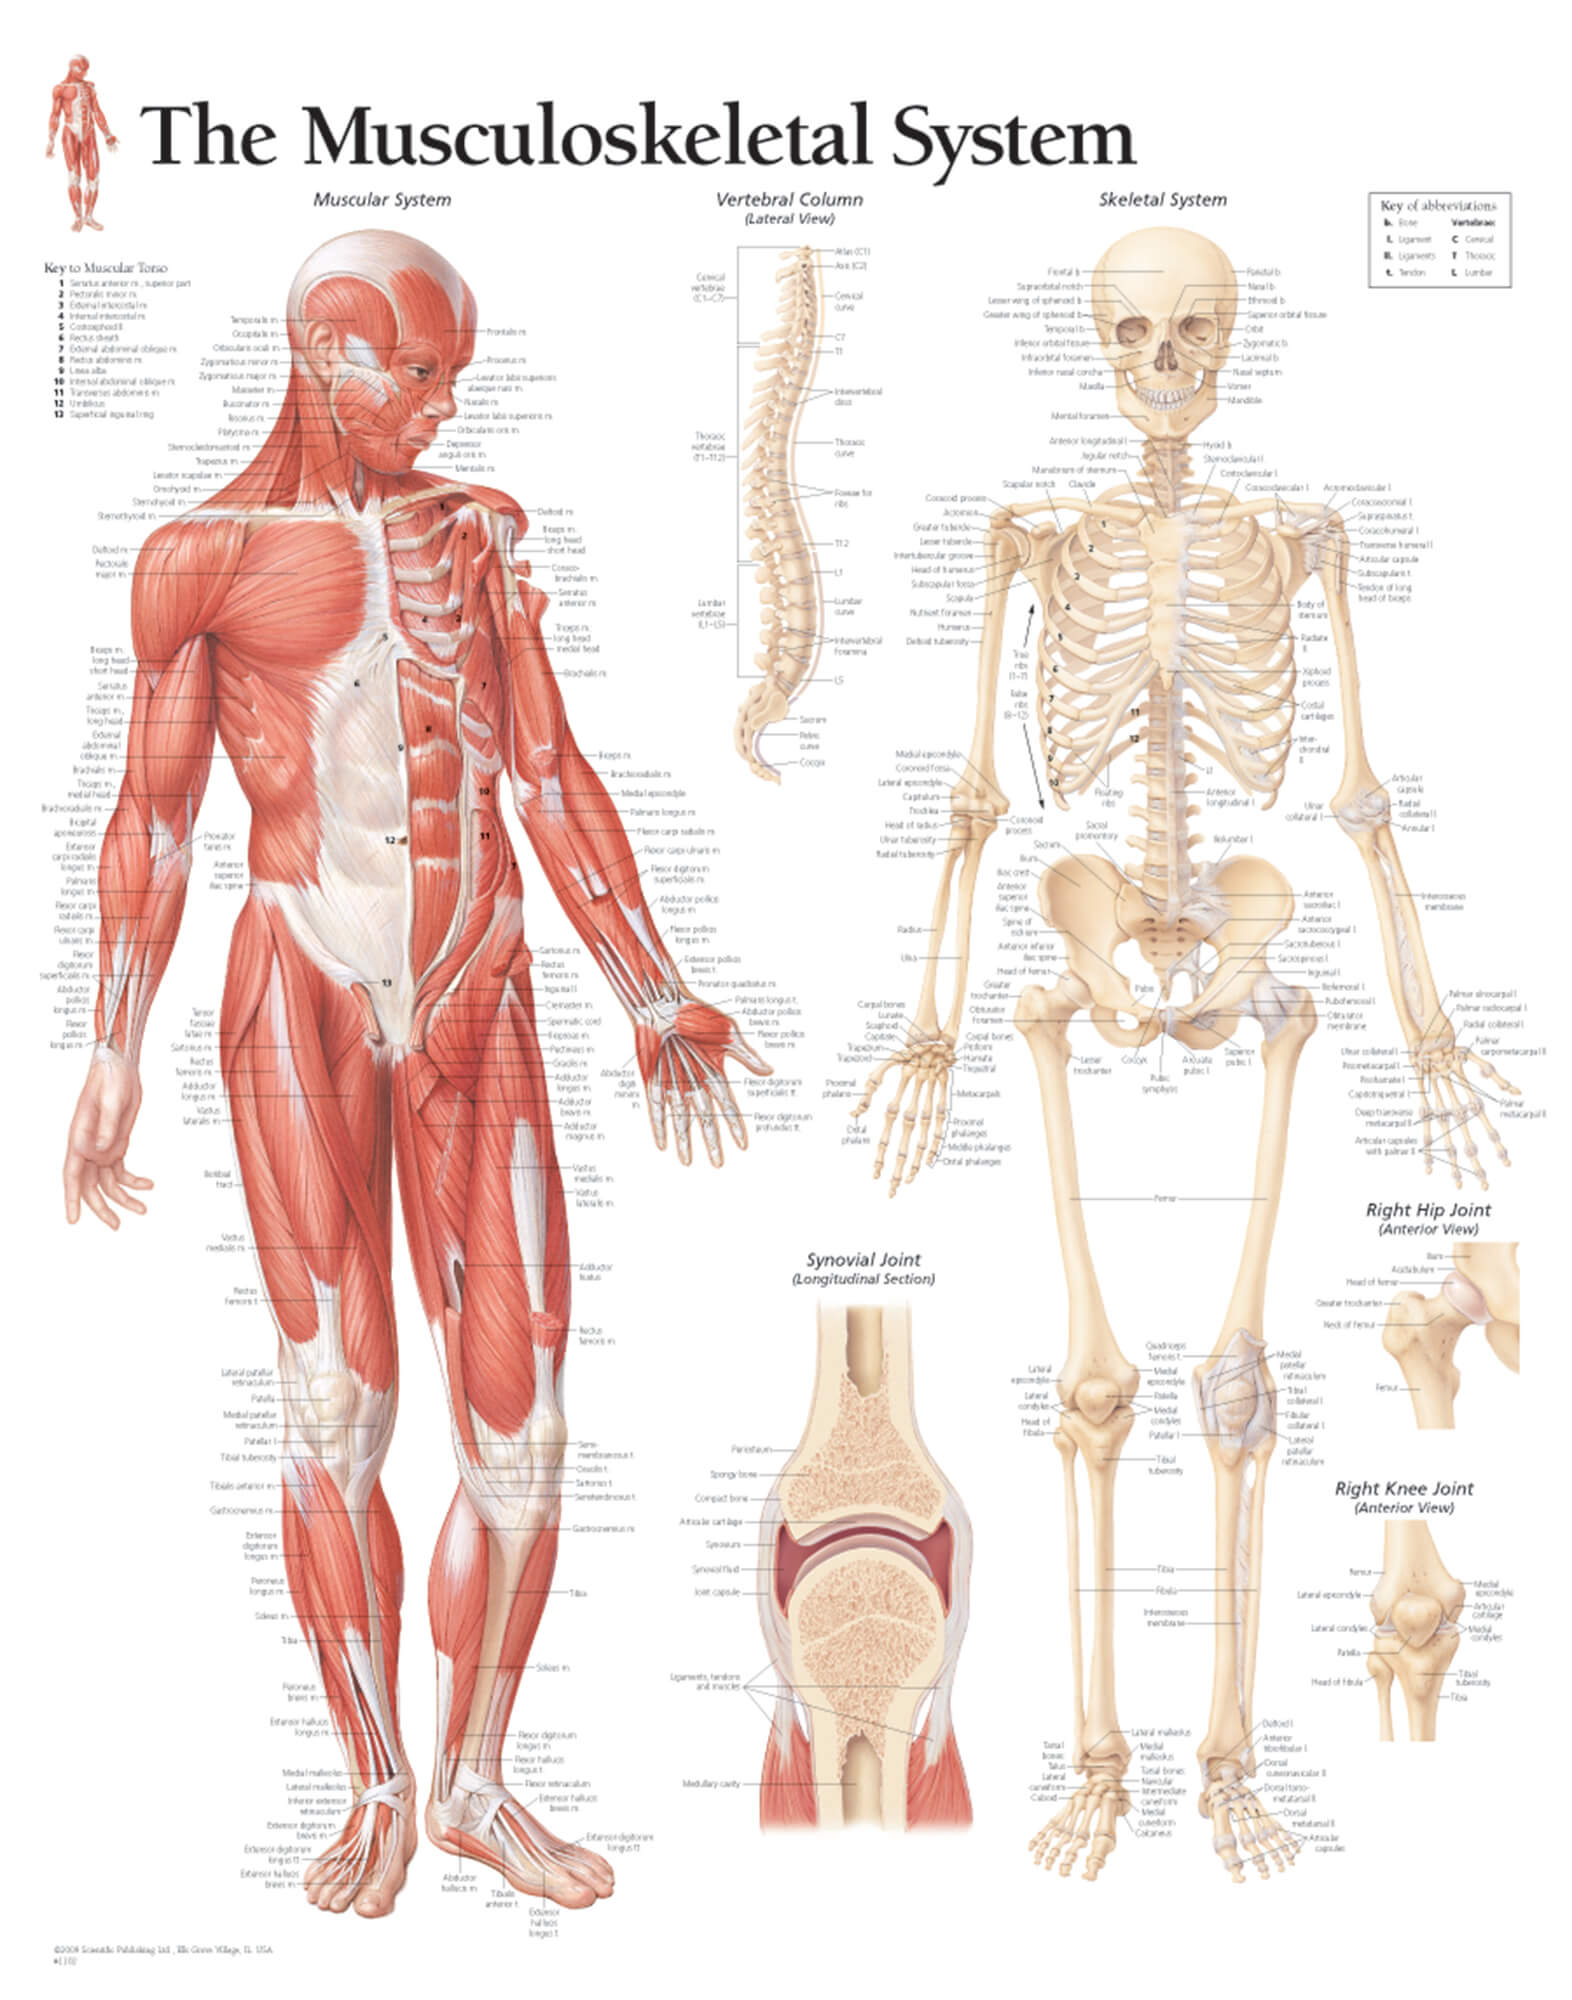 The Musculoskeletal System – Scientific Publishing